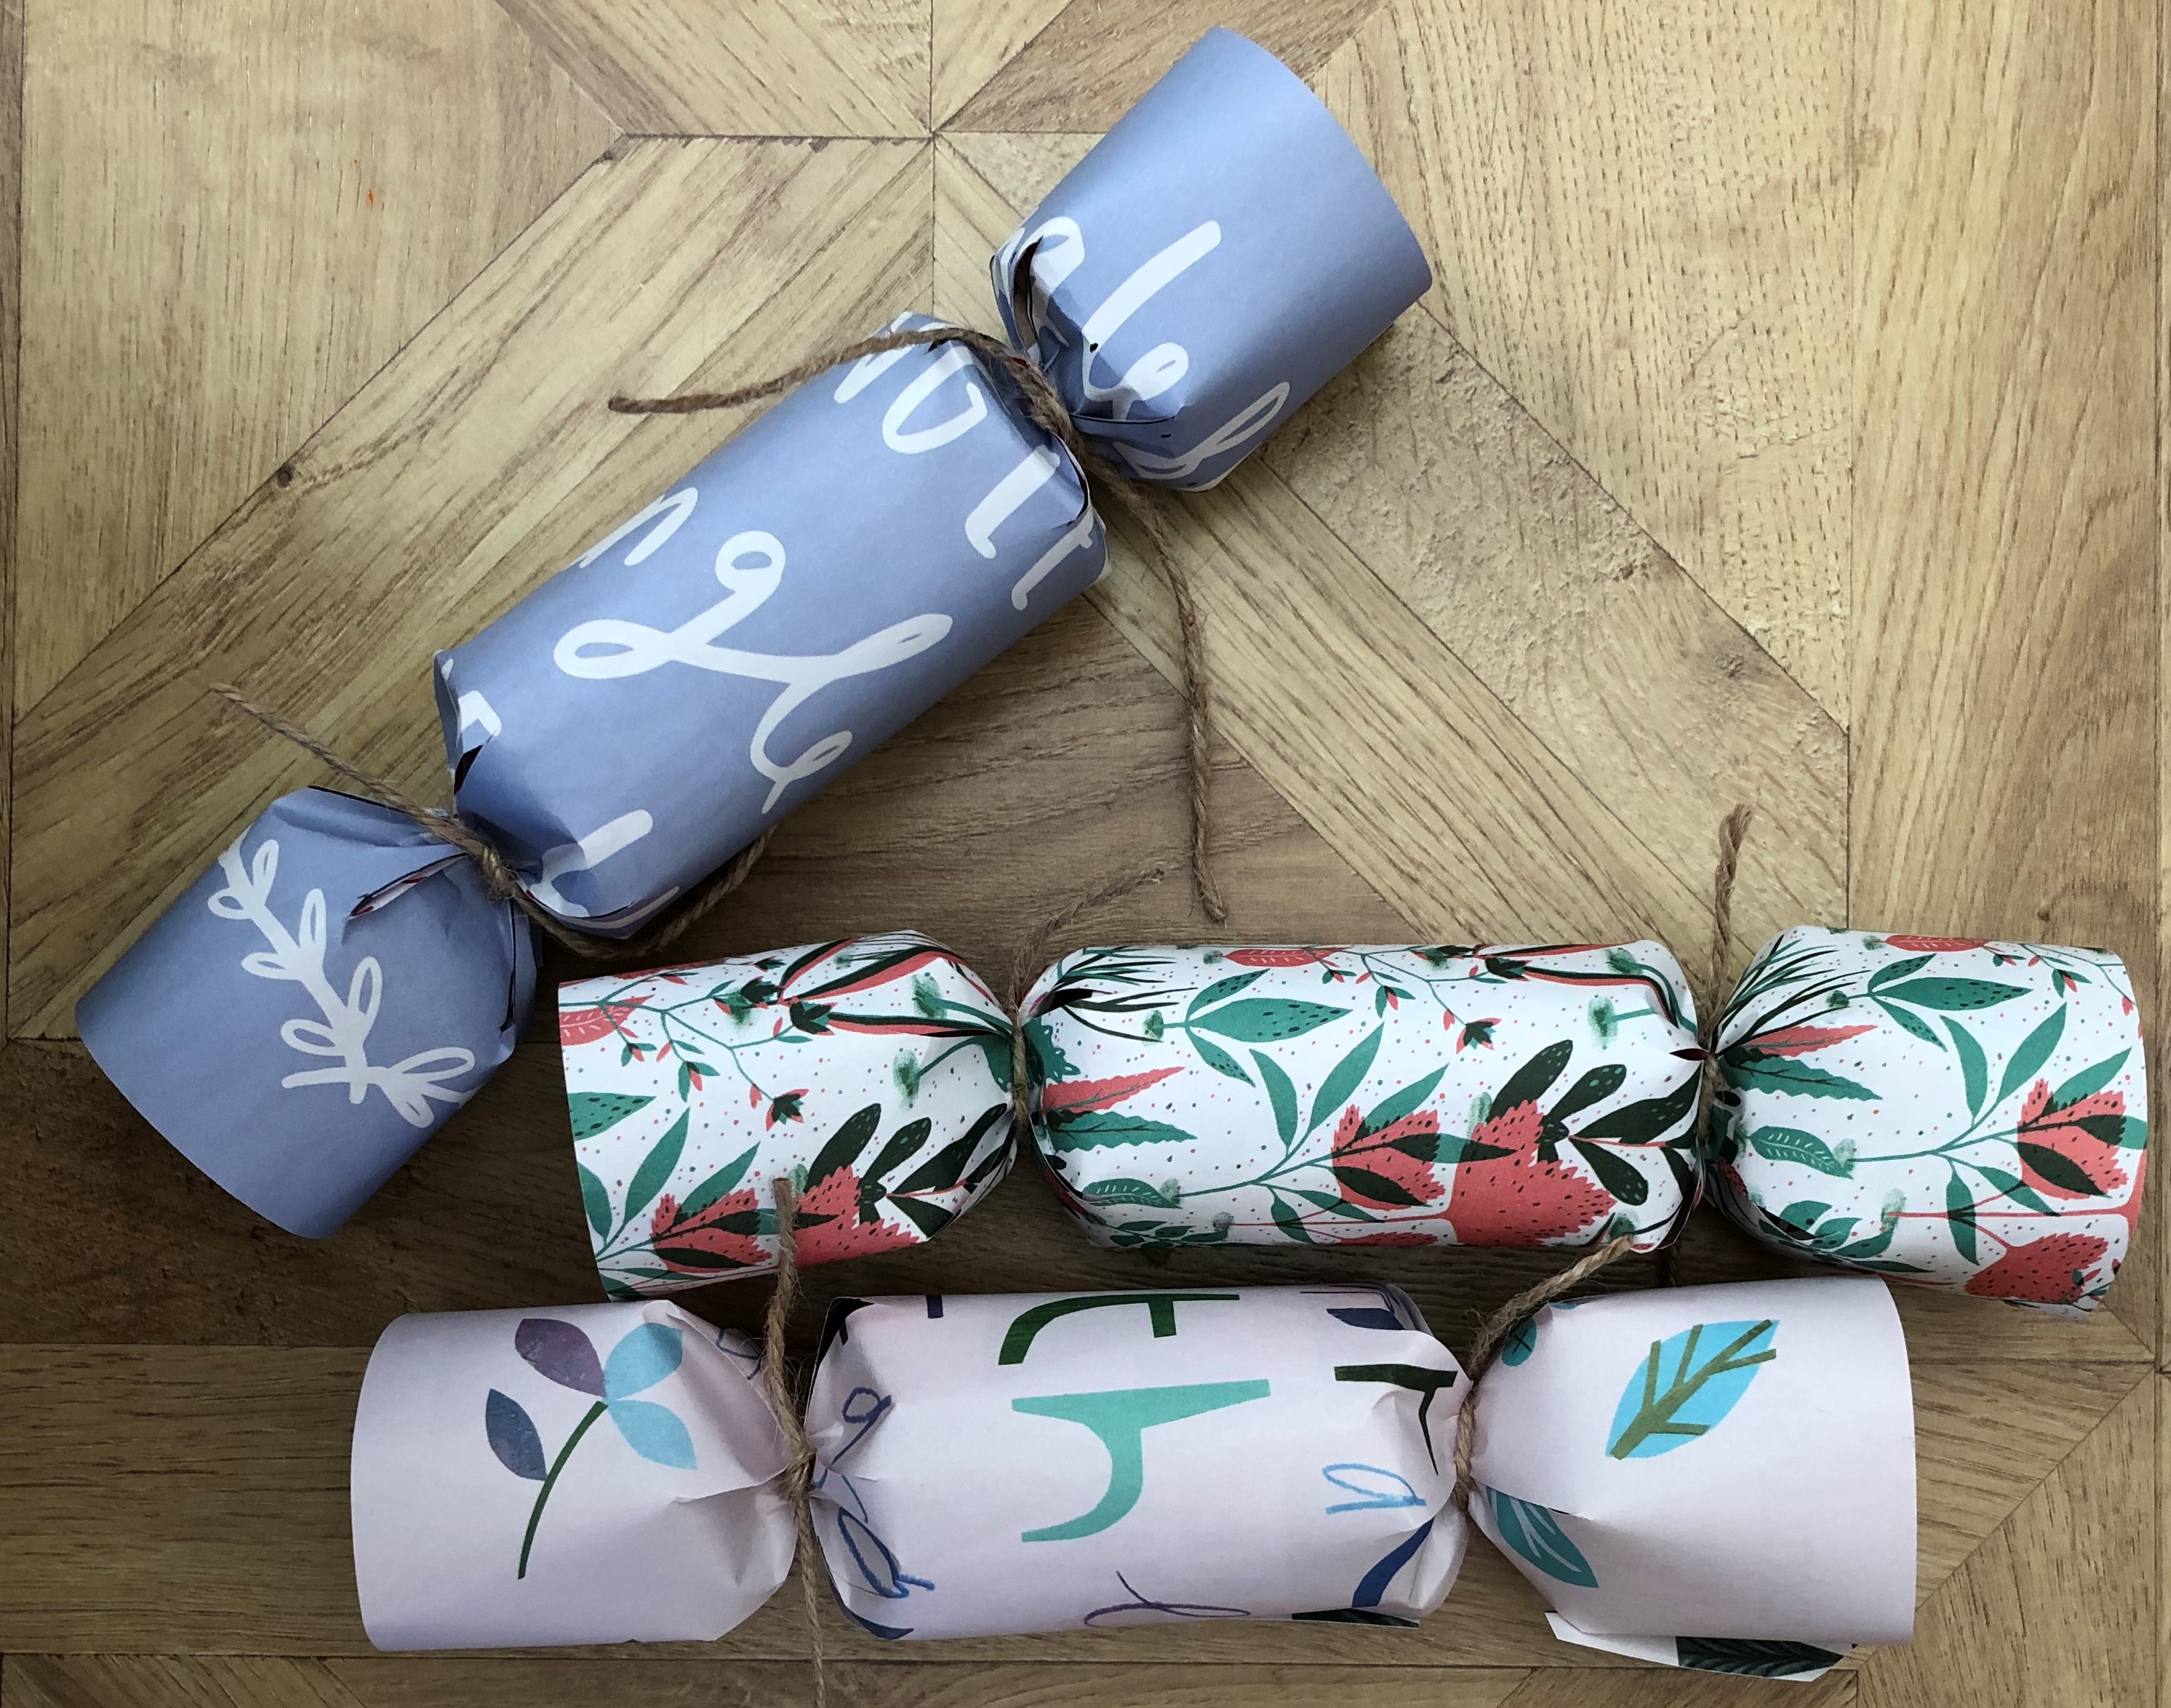 Make your own Christmas crackers